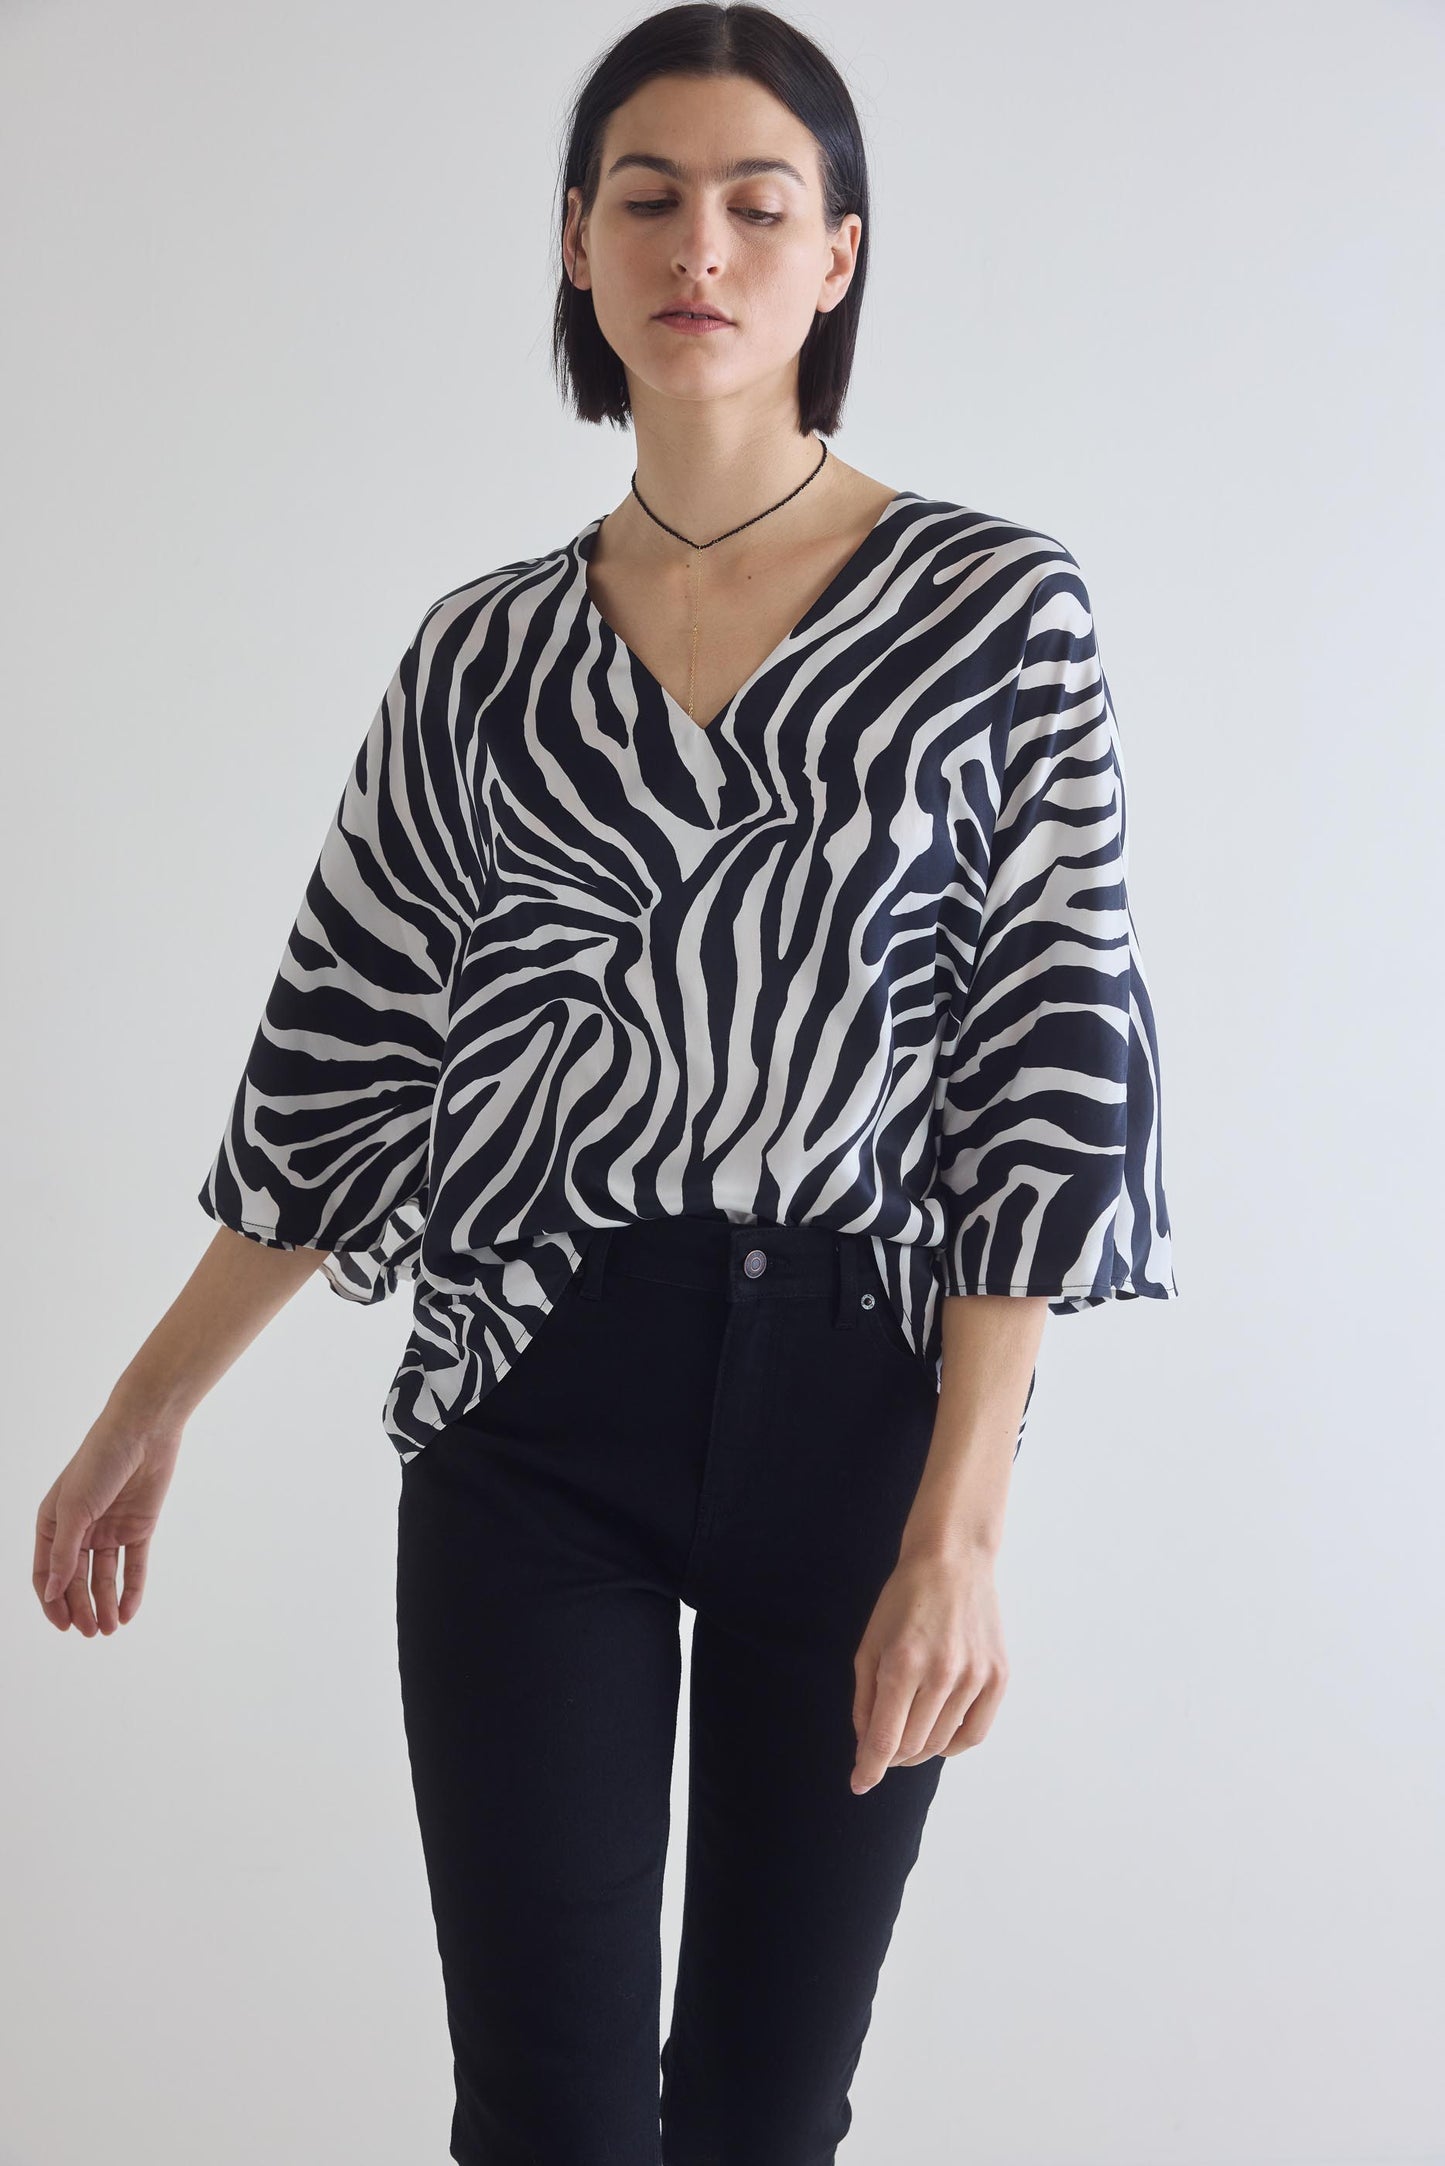 The Batwing Silk Top